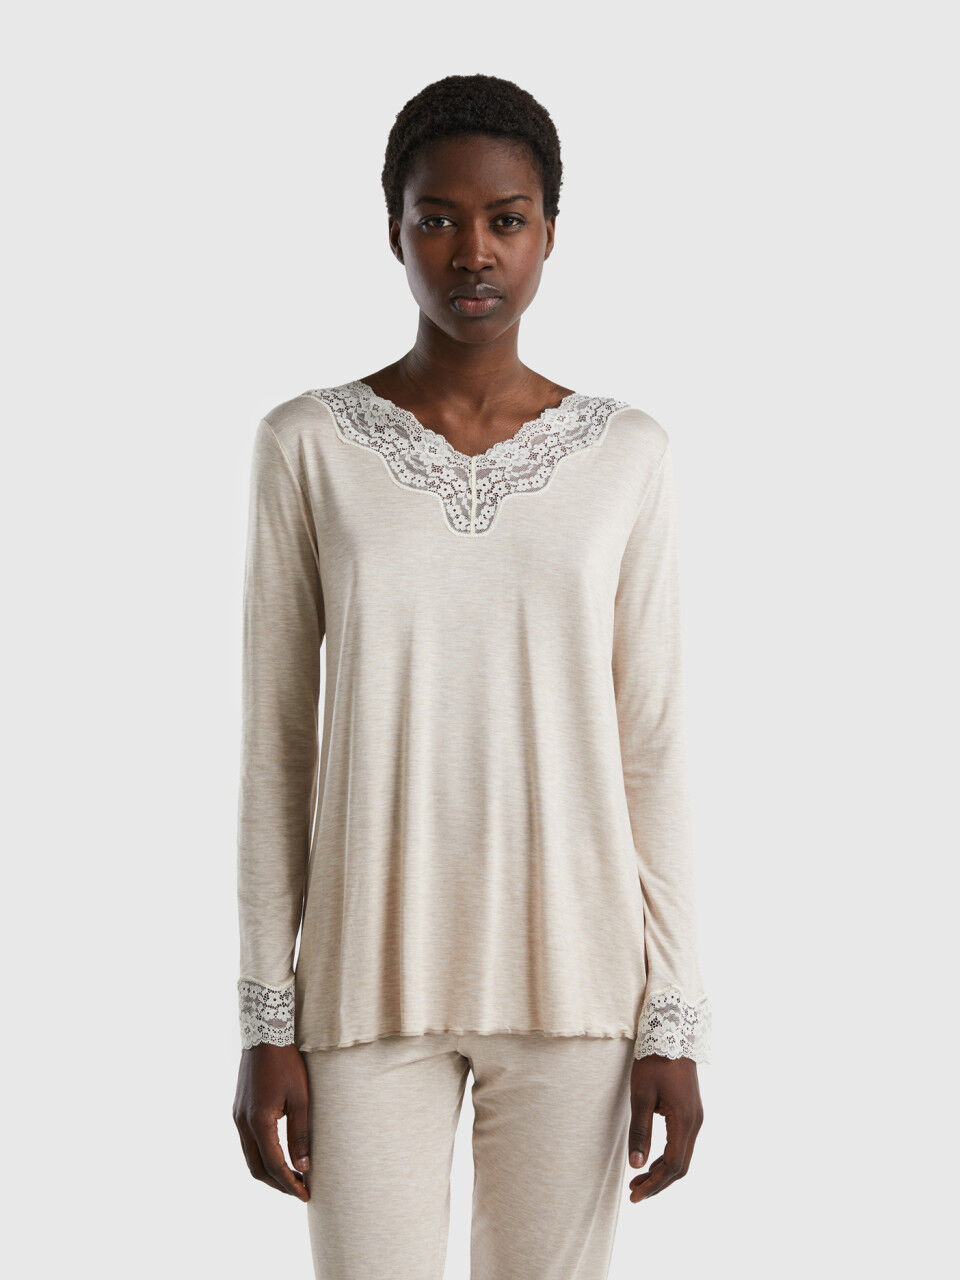 Top with lace detail